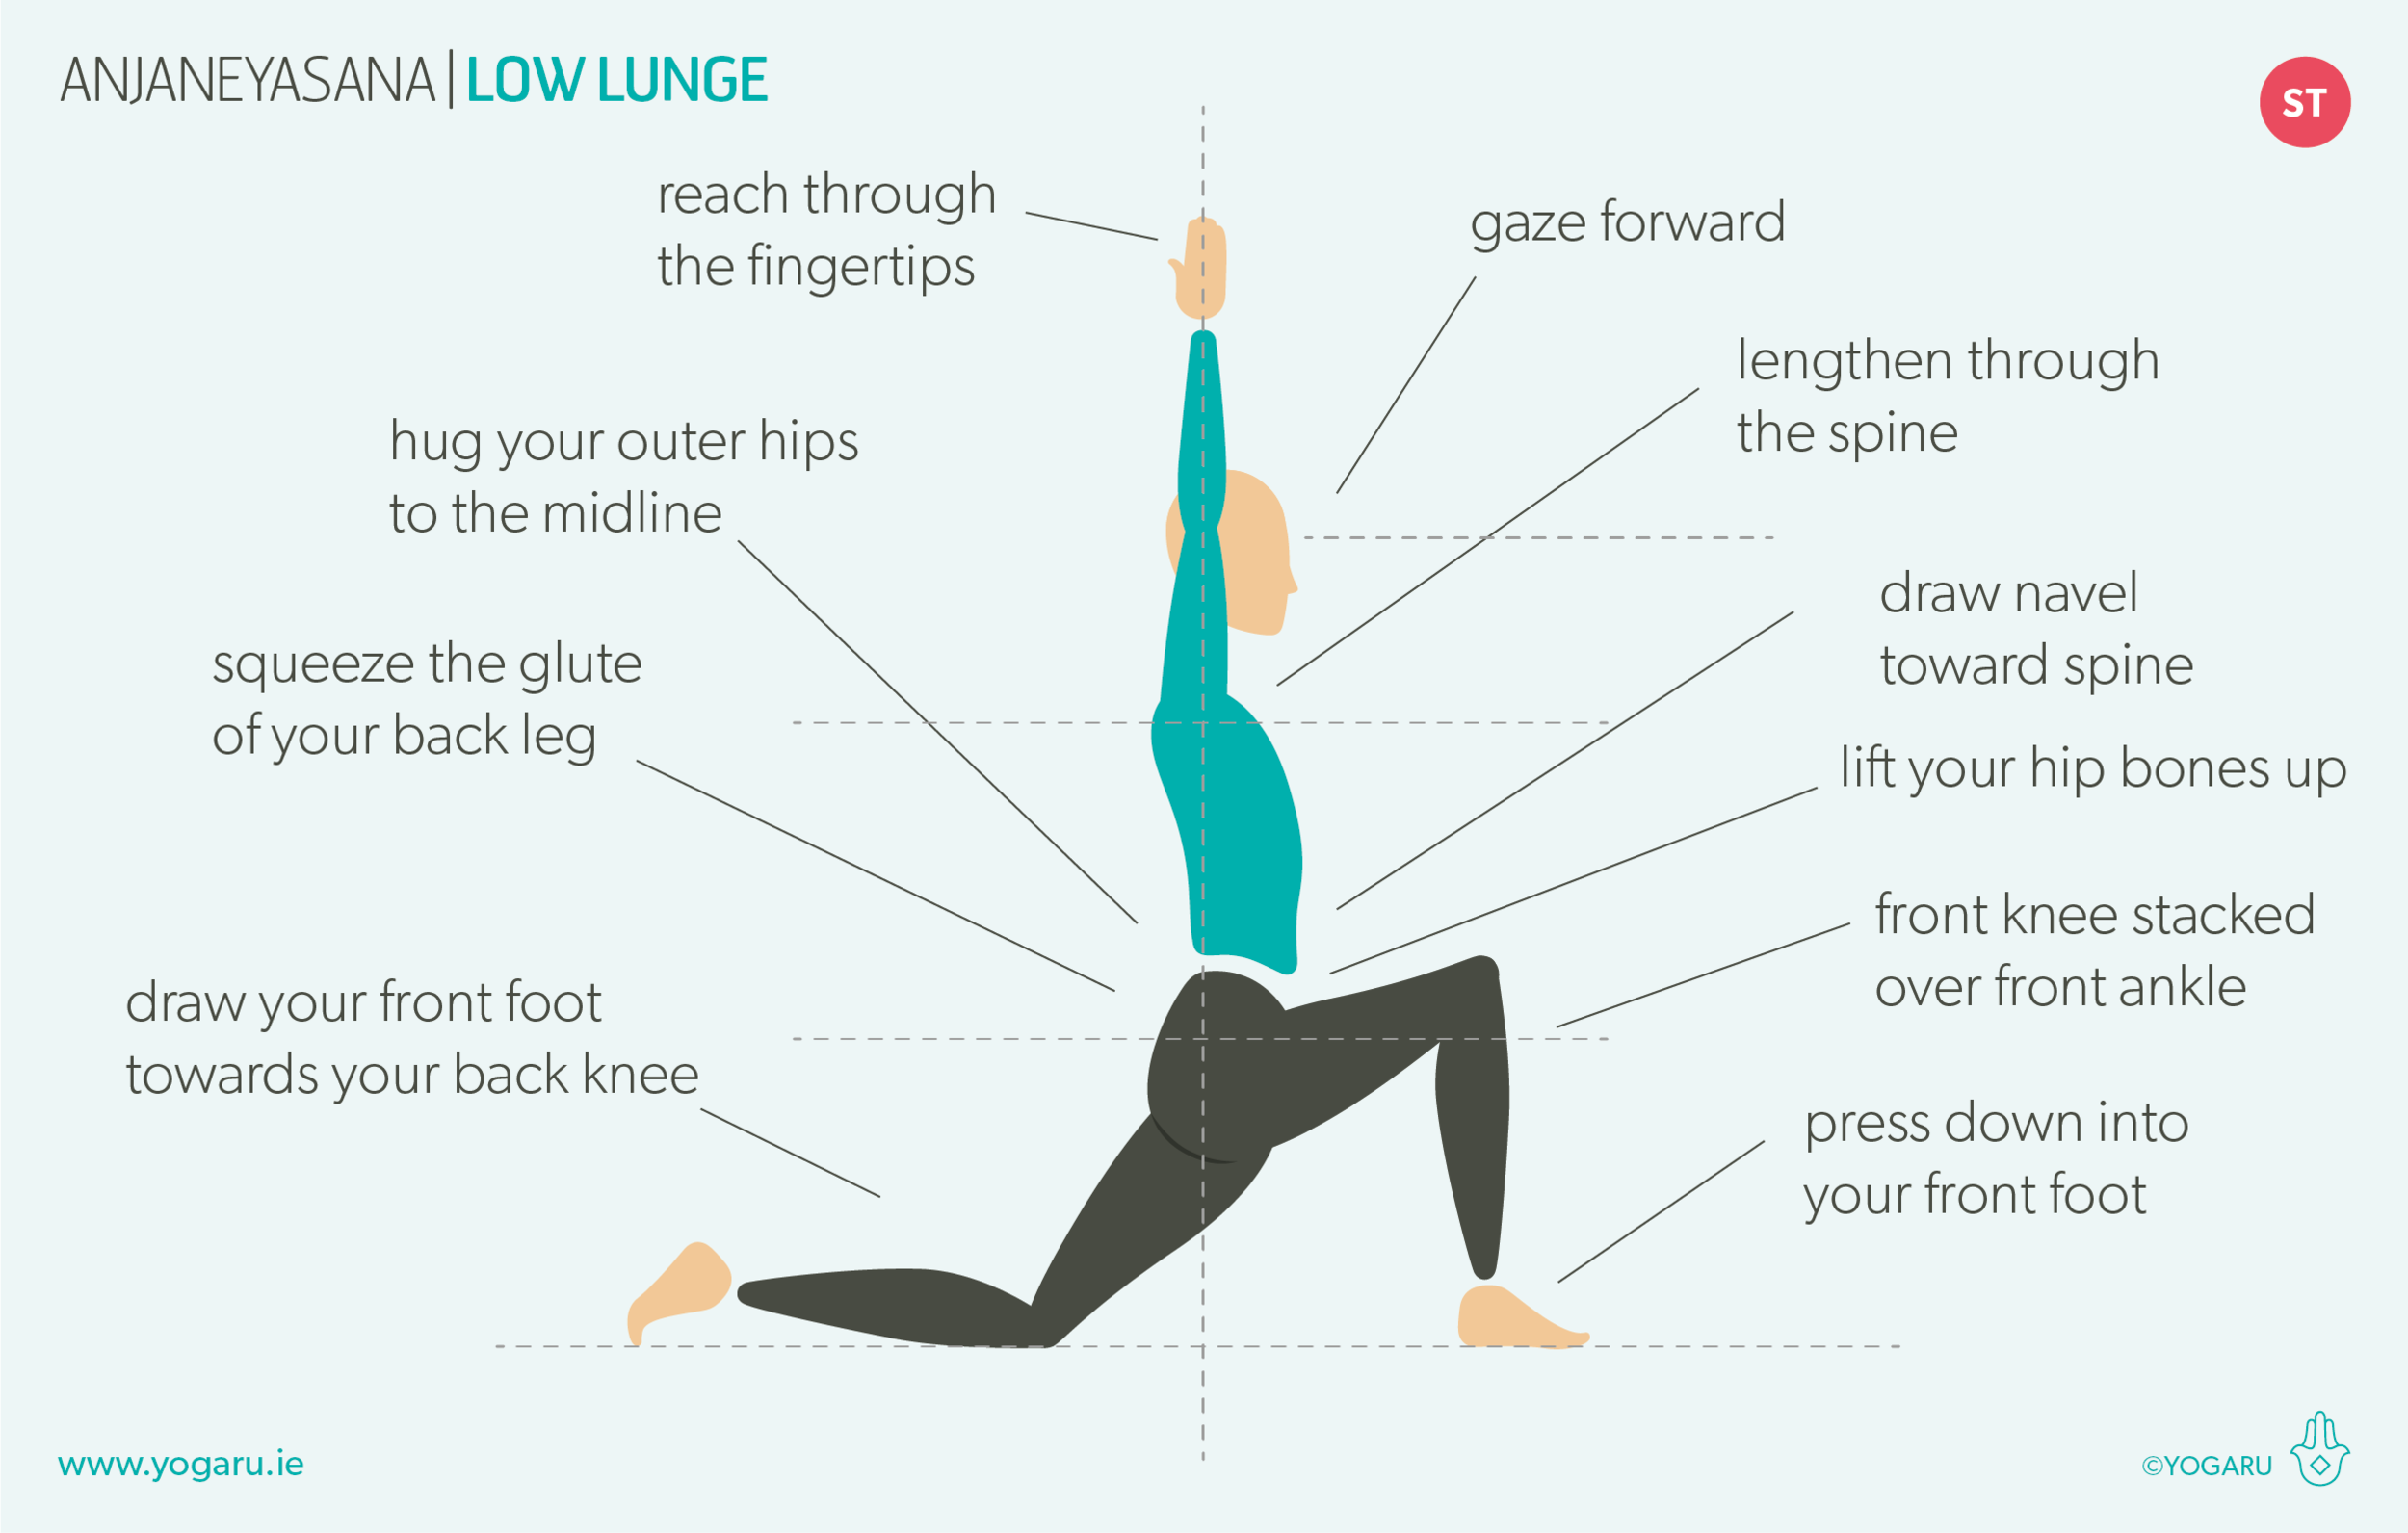 Practice These 10 Yoga Poses to Correct Bad Posture | YouAligned